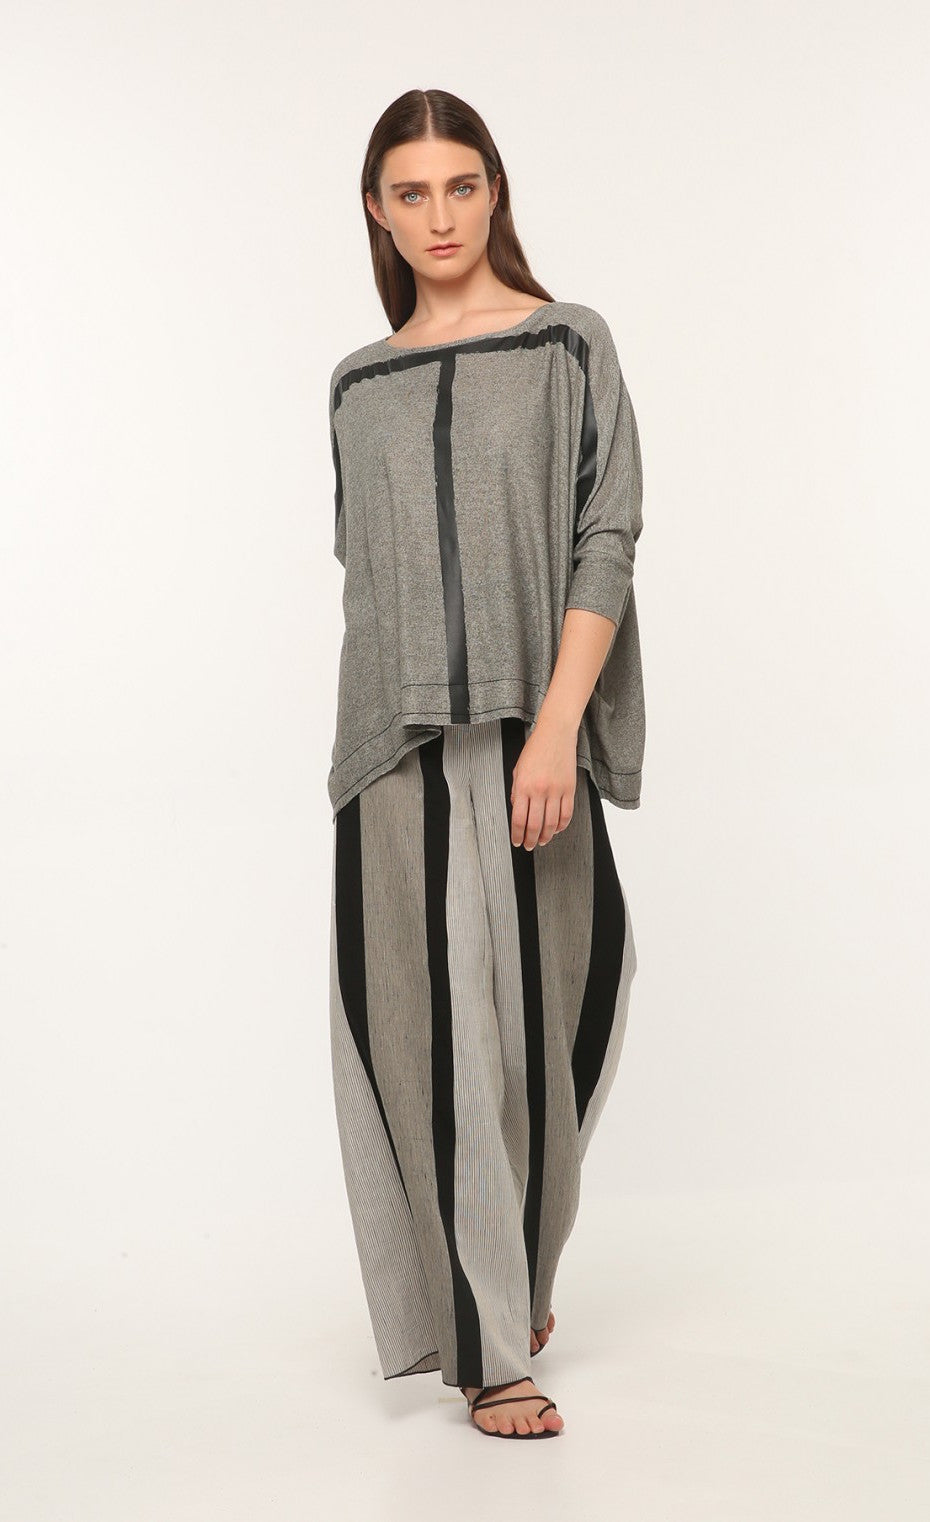 Front full body view of a woman wearing the ozai n ku marjoram top. This top is dark grey with two black painted lines on it that form a t shape. The top has 3/4 length sleeves.